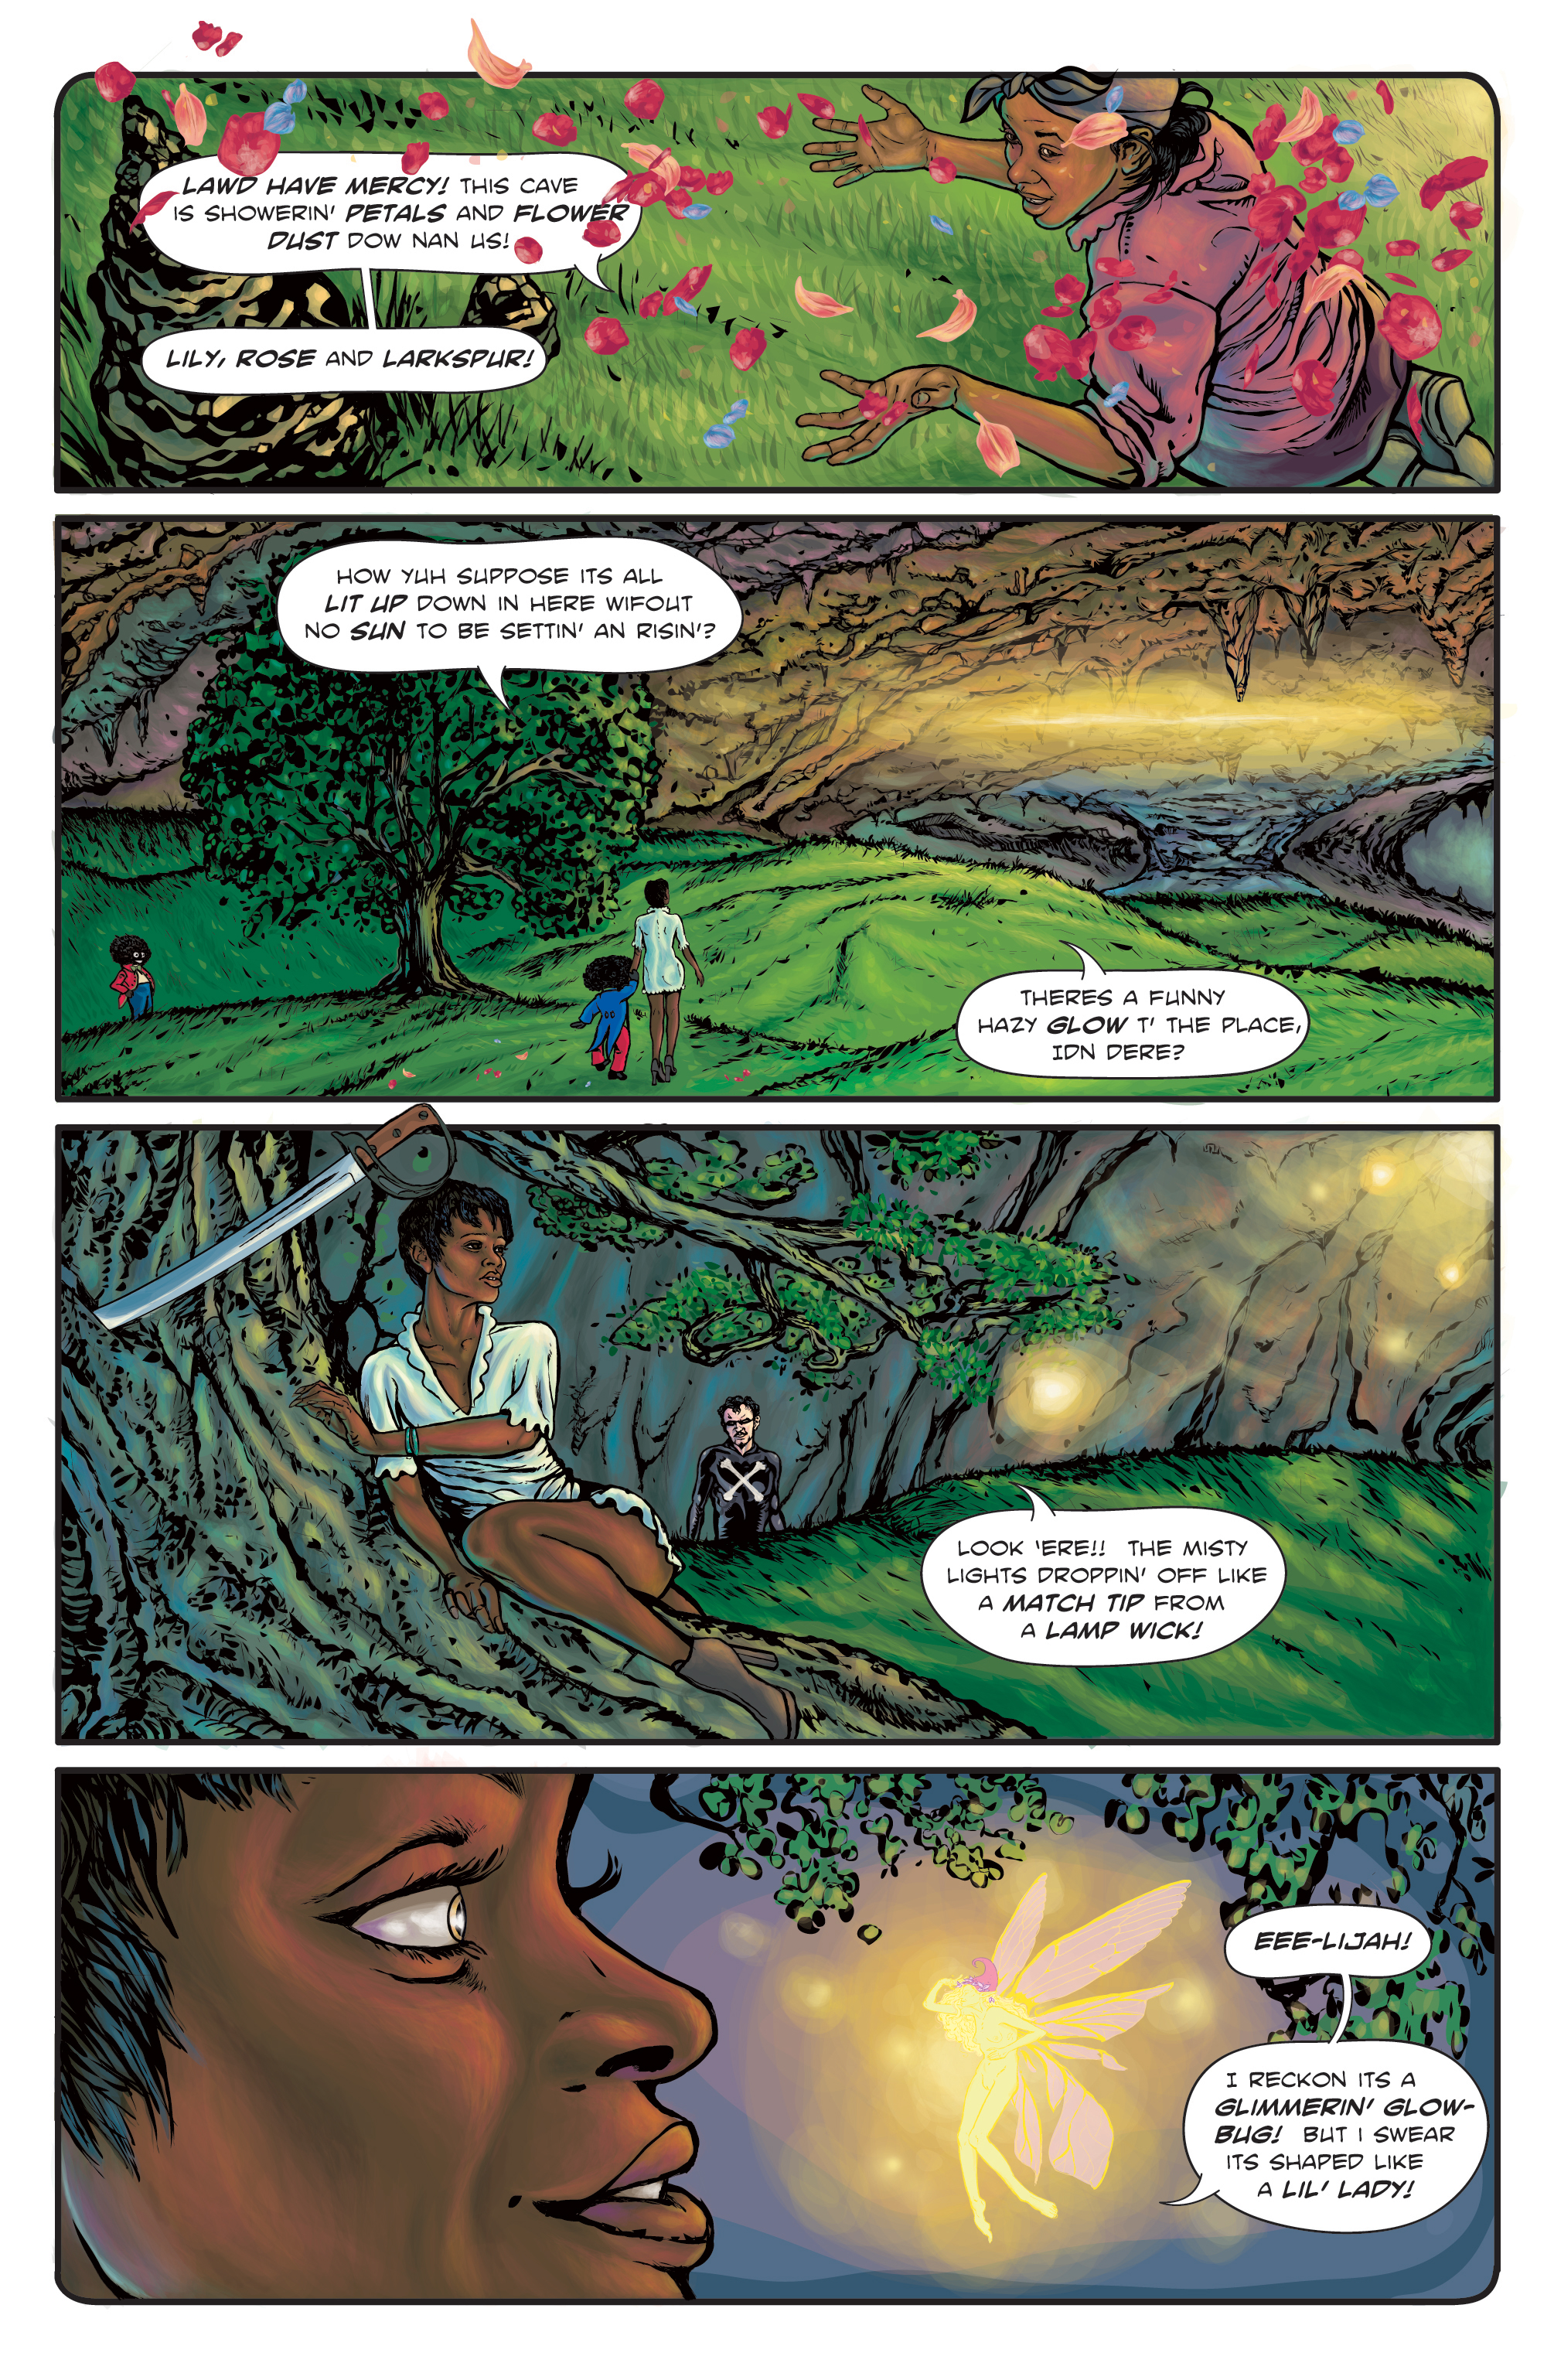 The Enchanted Dagger #3 -Page 17